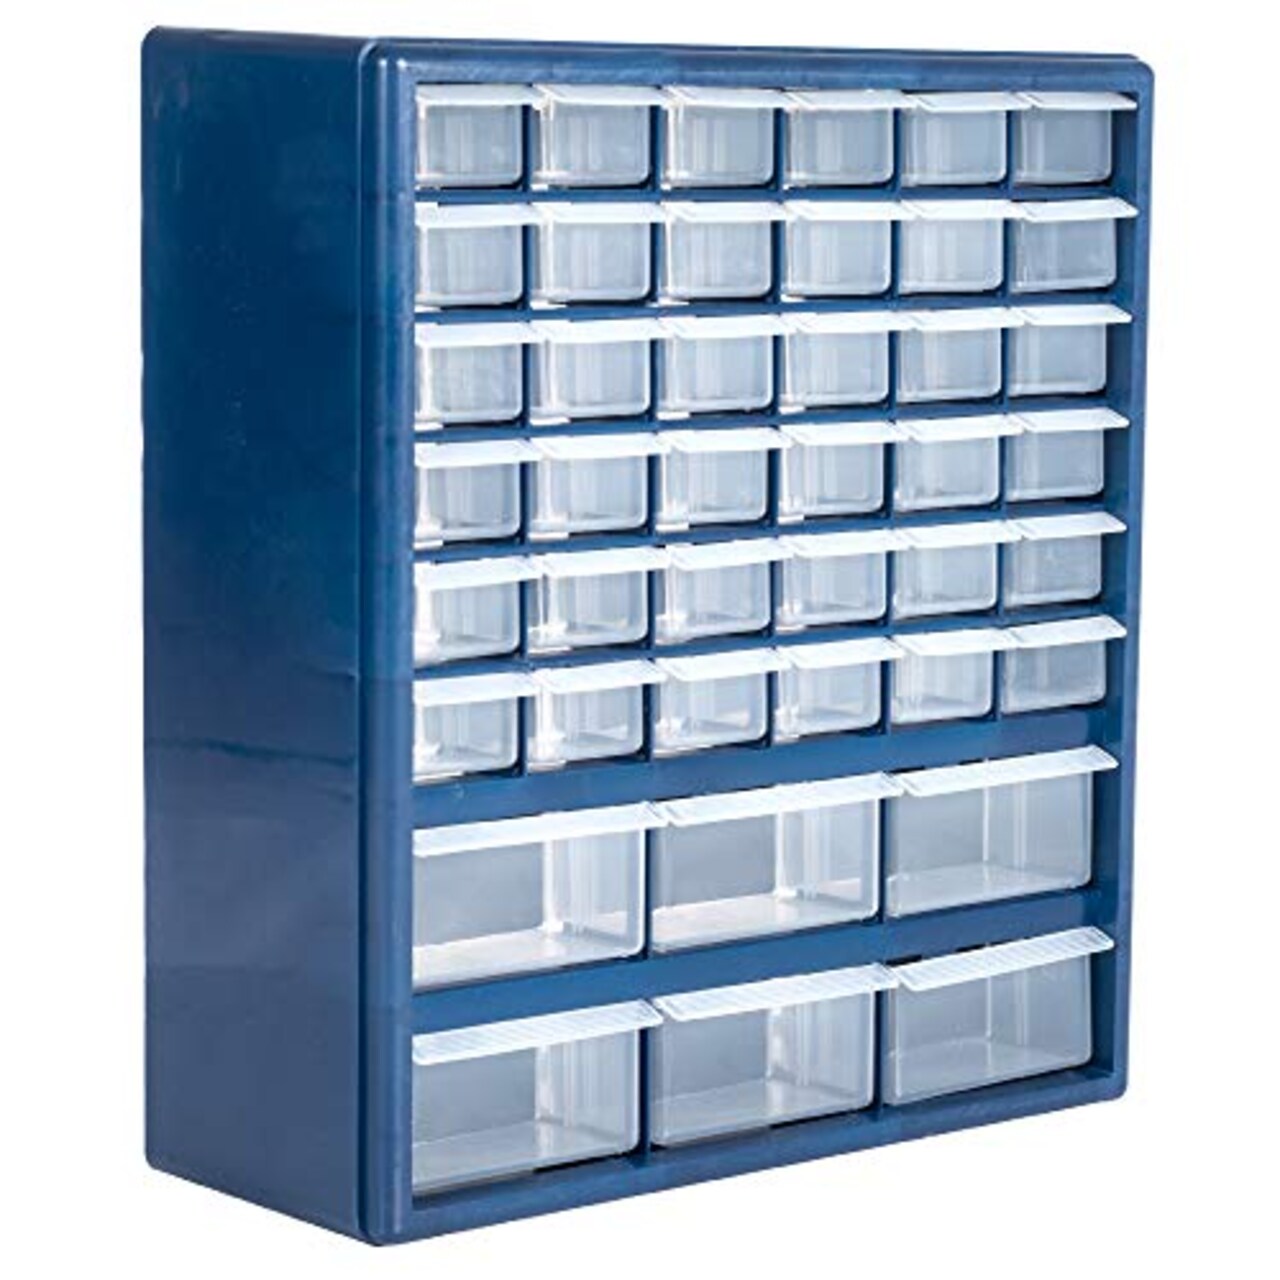 Plastic Storage Drawers – 42 Compartment Organizer – Desktop or Wall Mount  Container for Hardware, Parts, Crafts, Beads, or Tools by Stalwart, 10  Targets